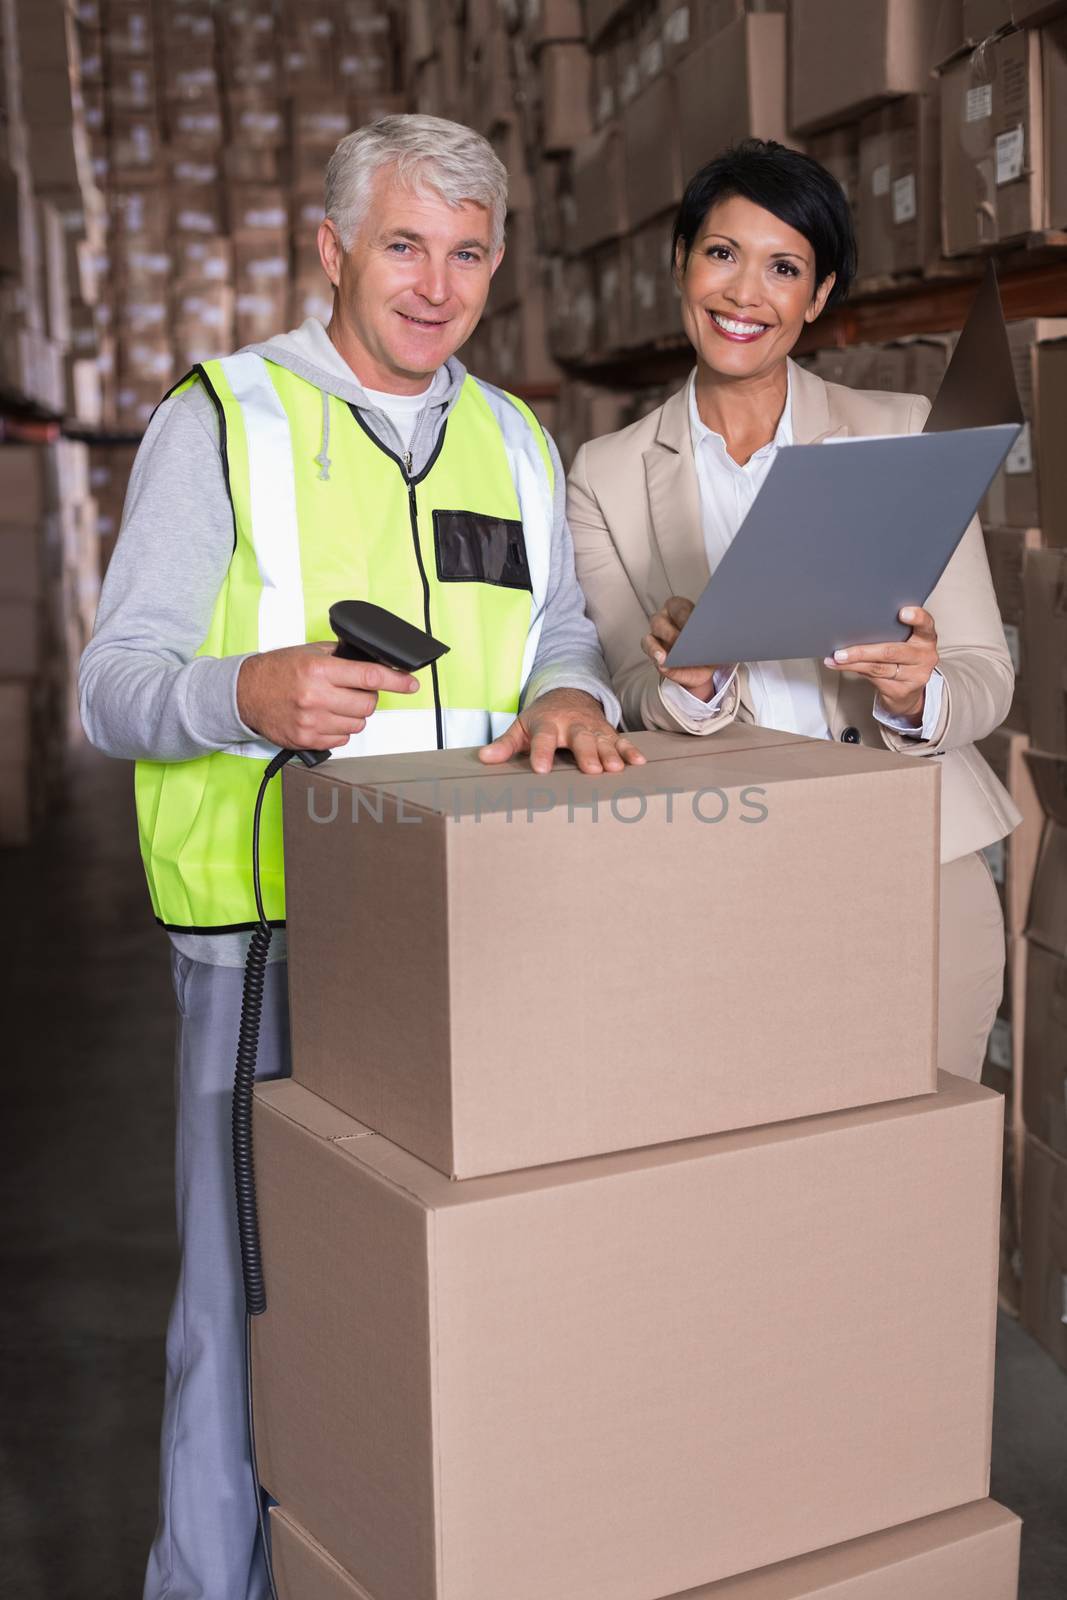 Warehouse worker scanning box with manager in a large warehouse